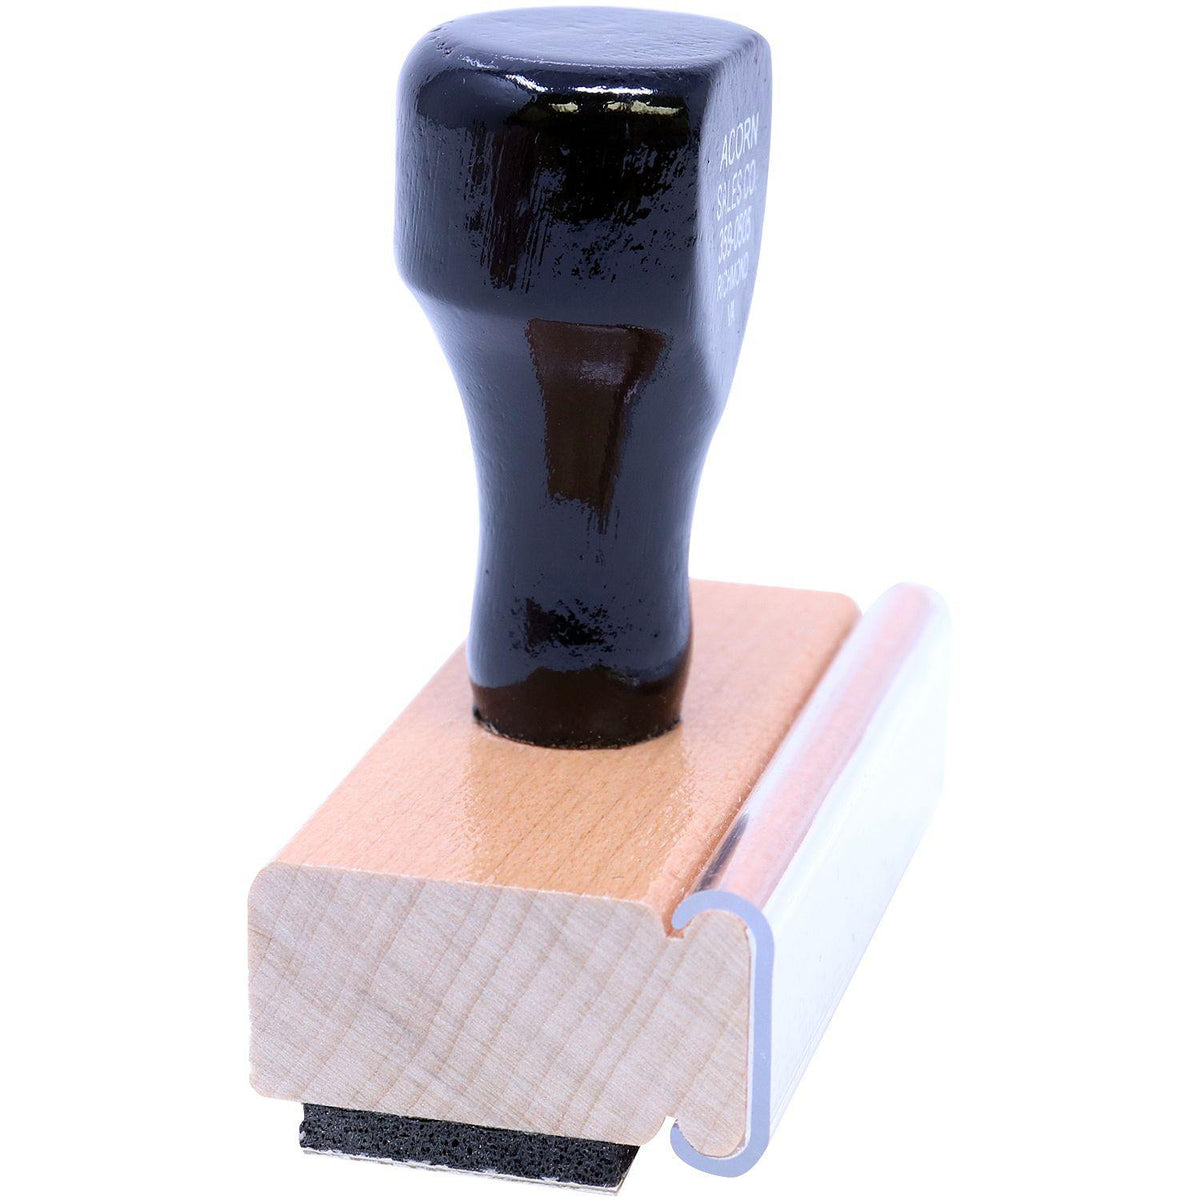 Side View of Large Contact Tracing Rubber Stamp at an Angle